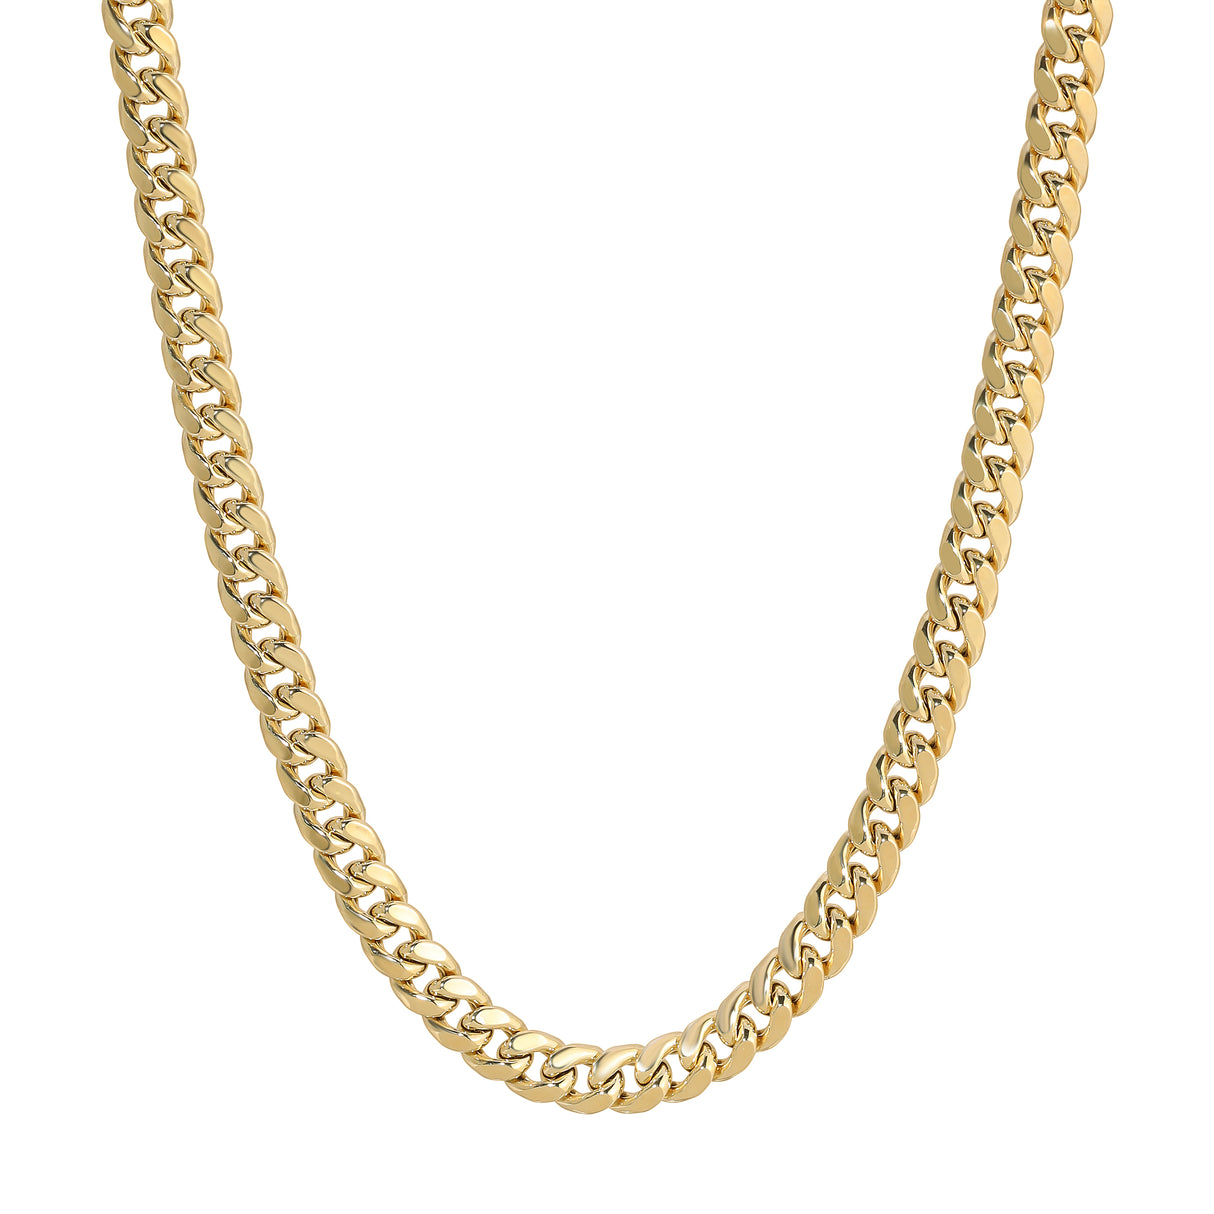 Wide 14K gold Miami Cuban chain | Real Gold Chains for Women | Italian Fashions